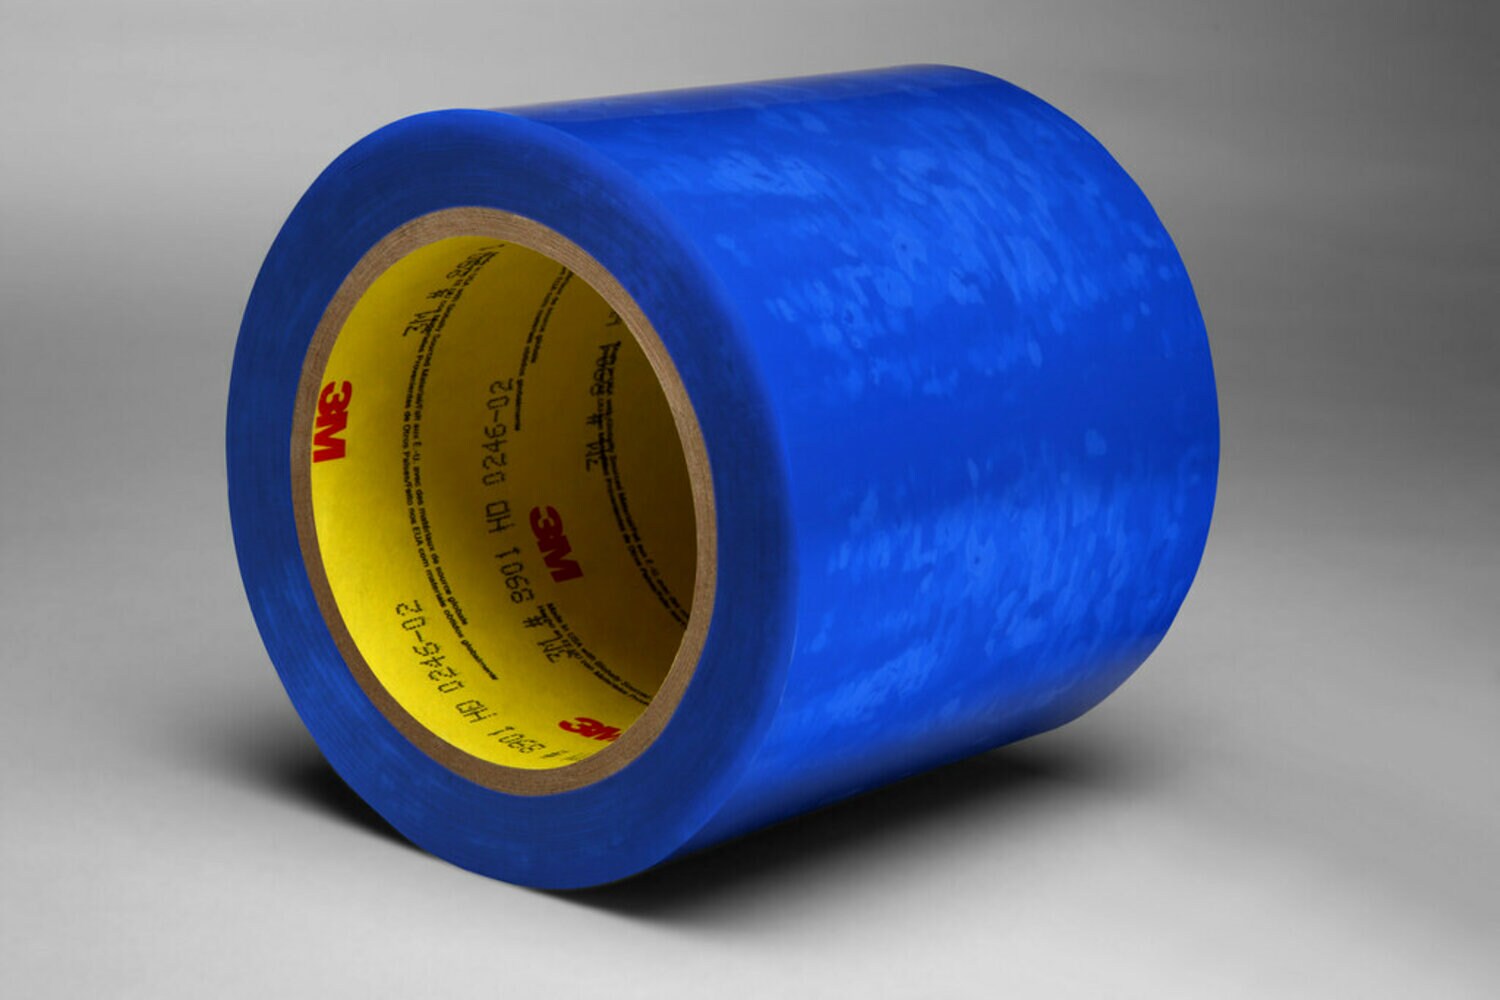 7010374693 - 3M Polyester Tape 8901, Blue, 2 in x 72 yd, 0.9 mil, 24 rolls per case,
Plastic Core